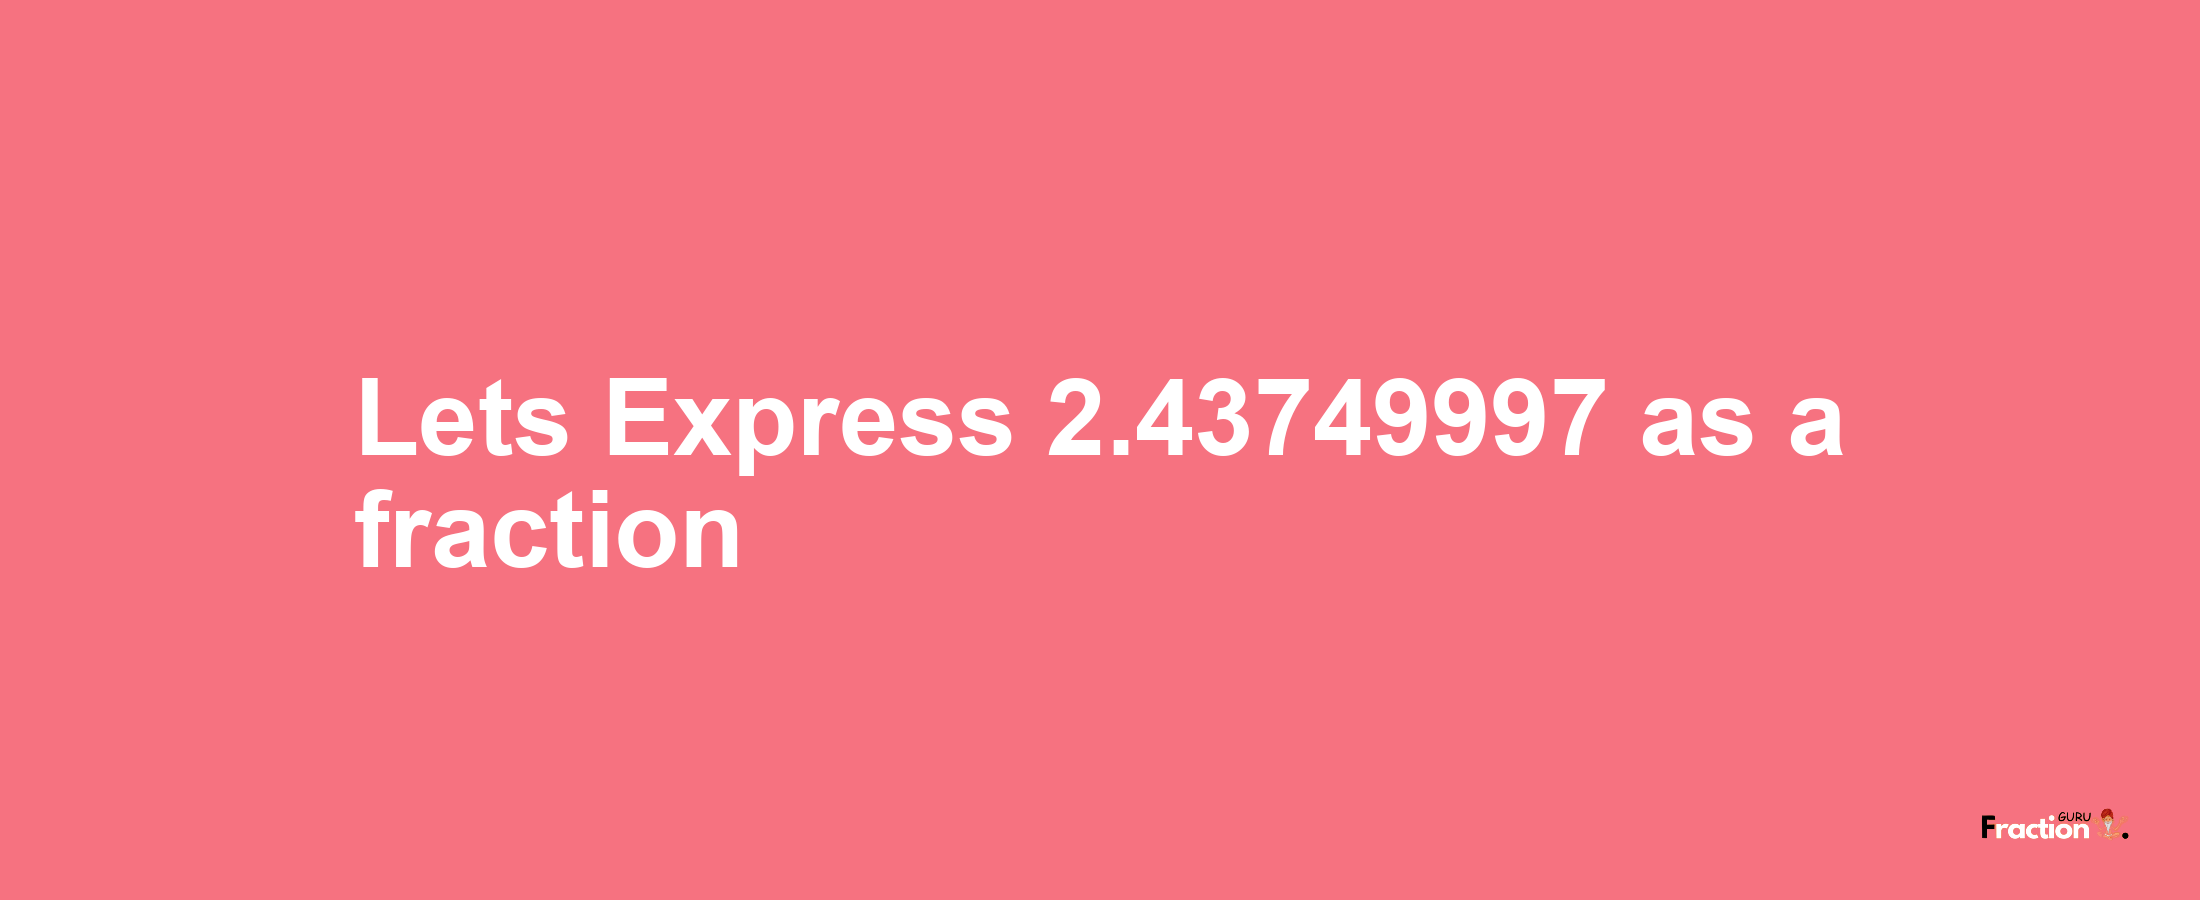 Lets Express 2.43749997 as afraction